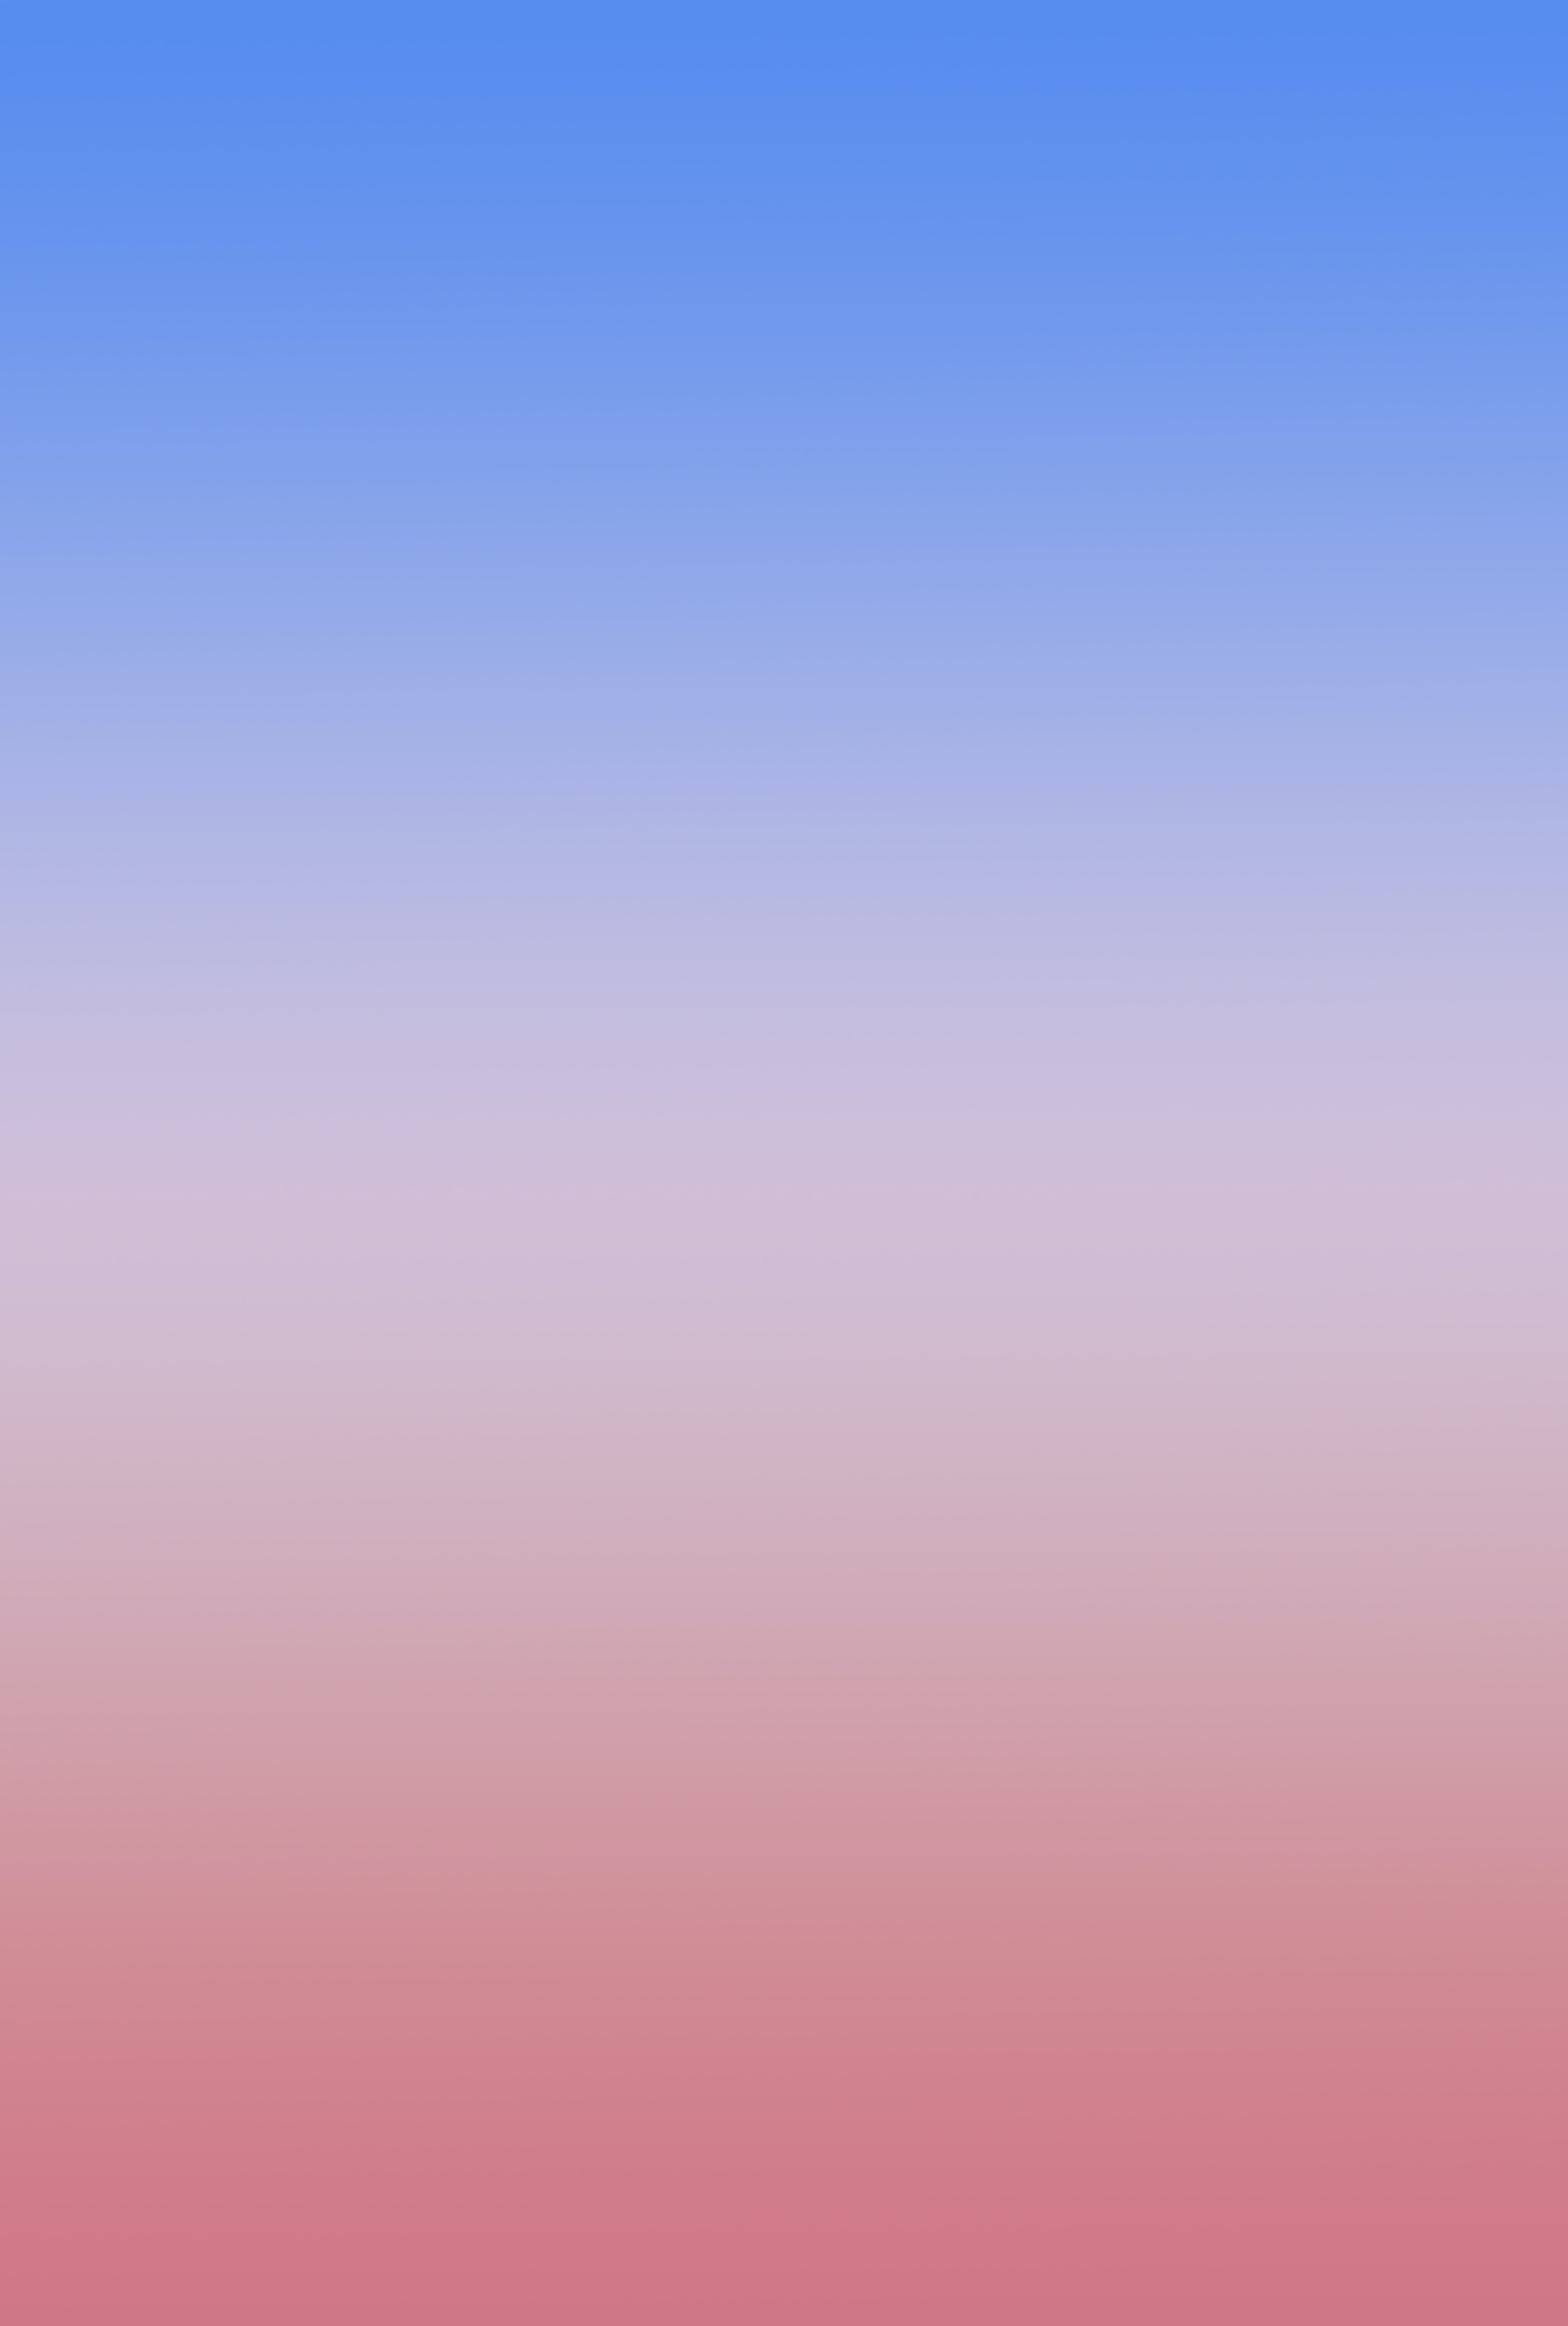 96660 download wallpaper gradient, abstract, sky, pink, blue screensavers and pictures for free